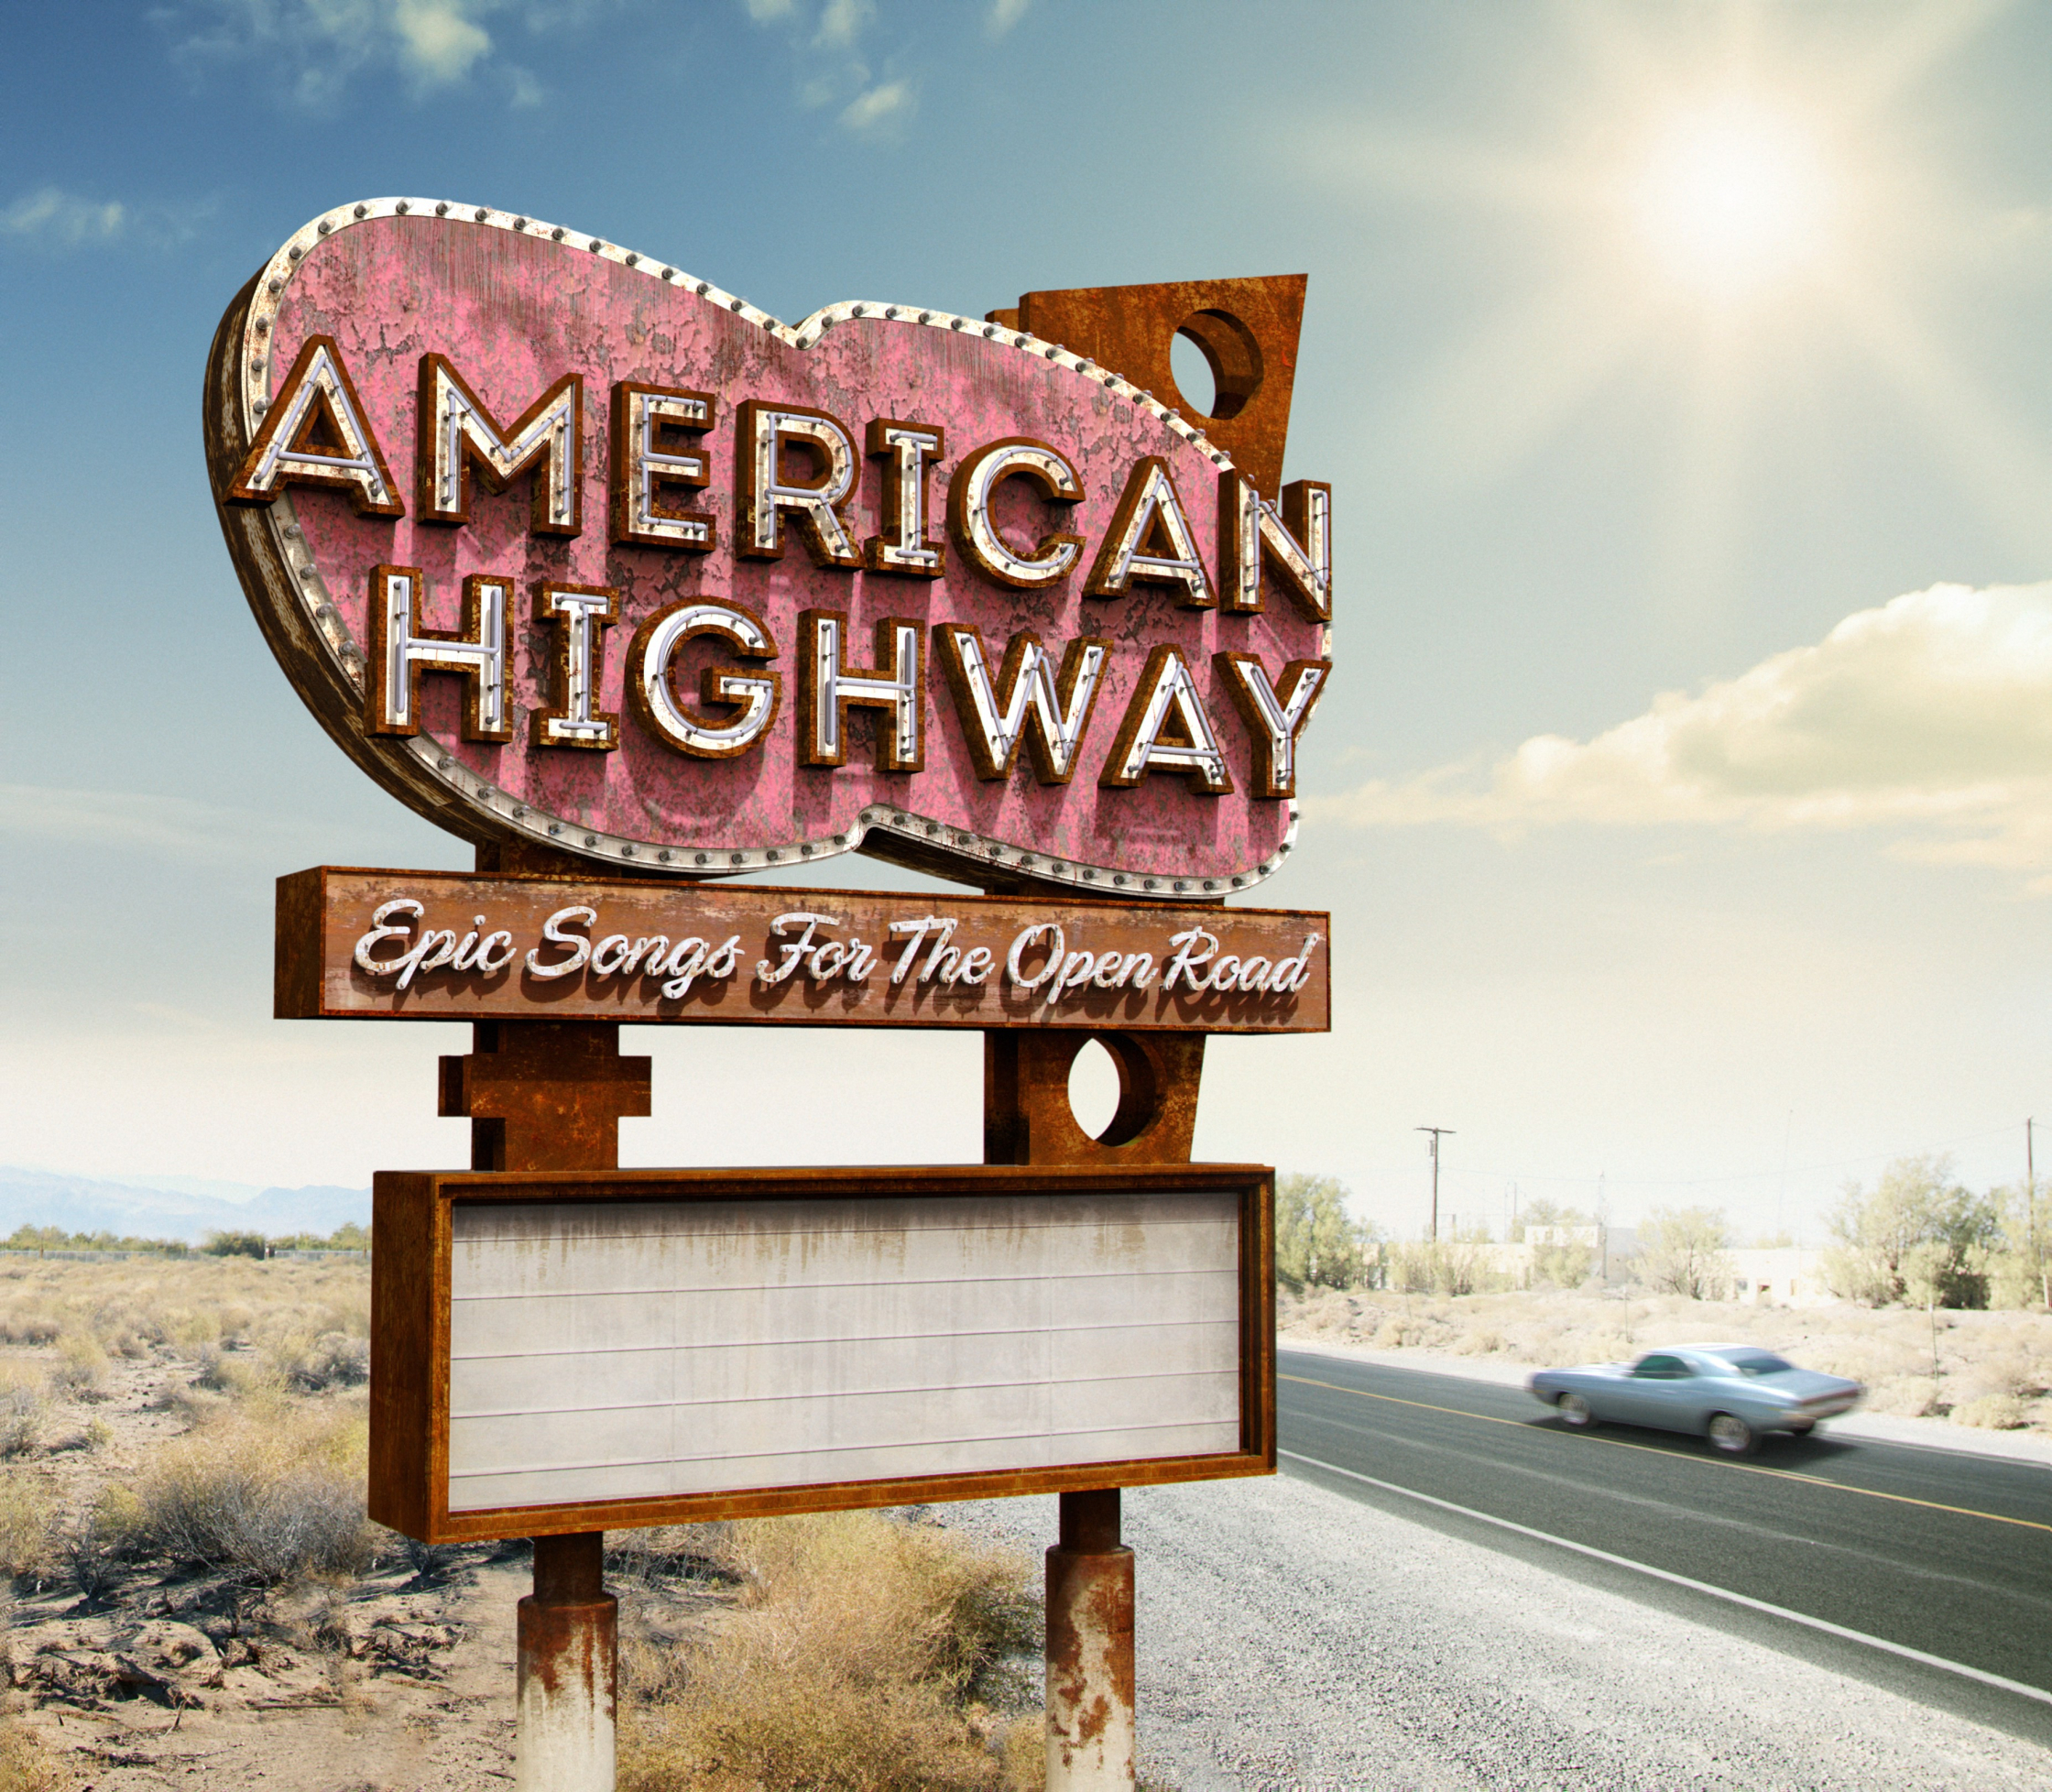 American Highway Retro Neon Sign CD Cover